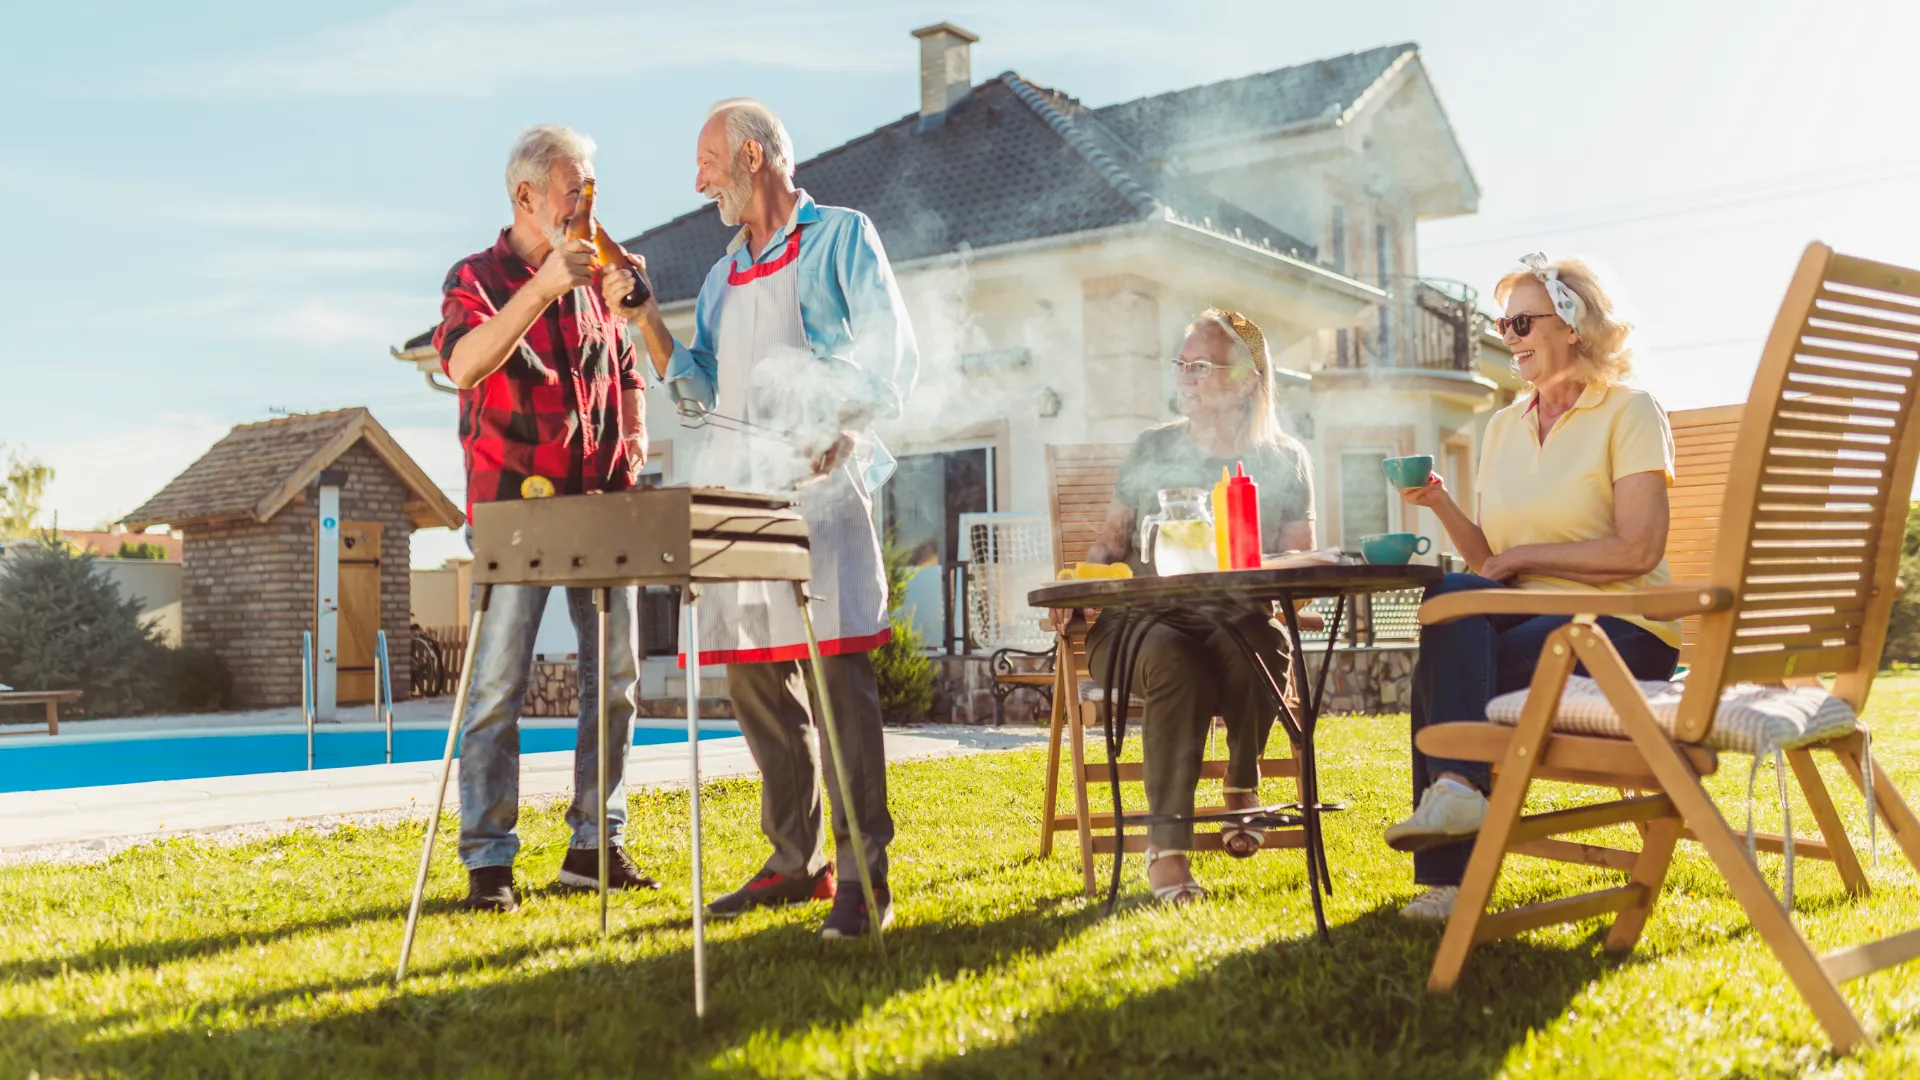 A group of retirees barbecuing in a backyard.